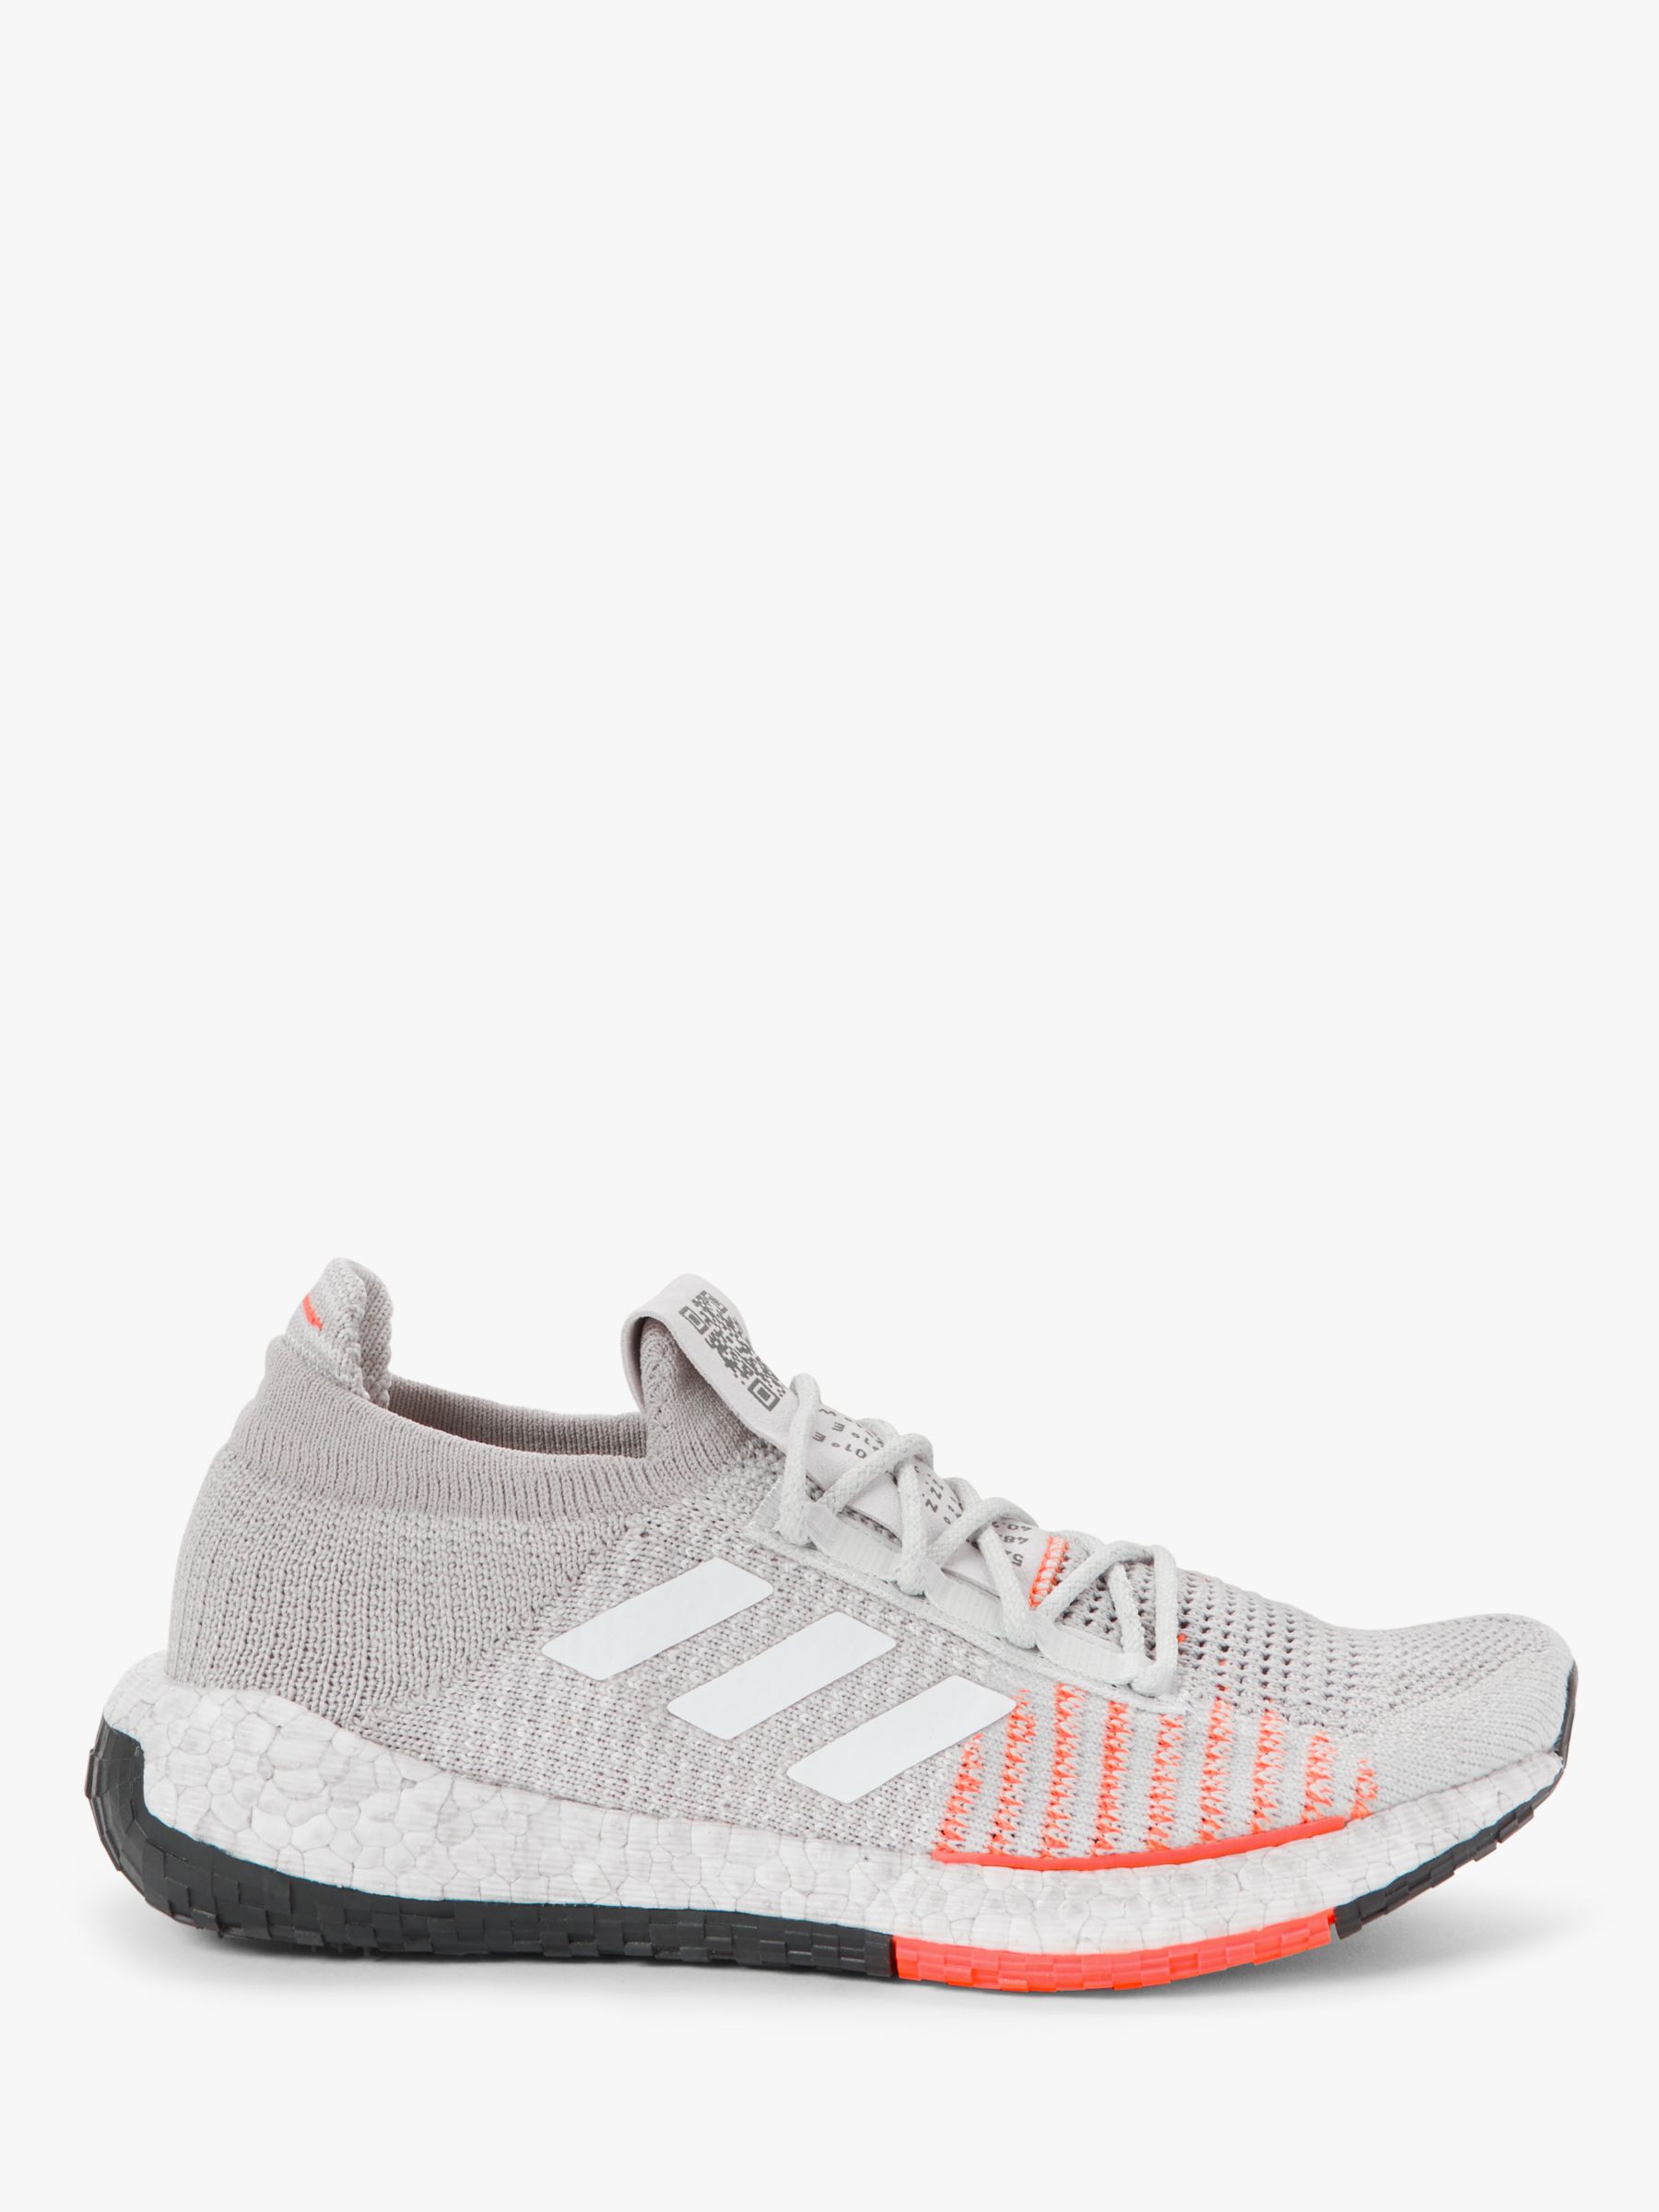 women's adidas coral shoes